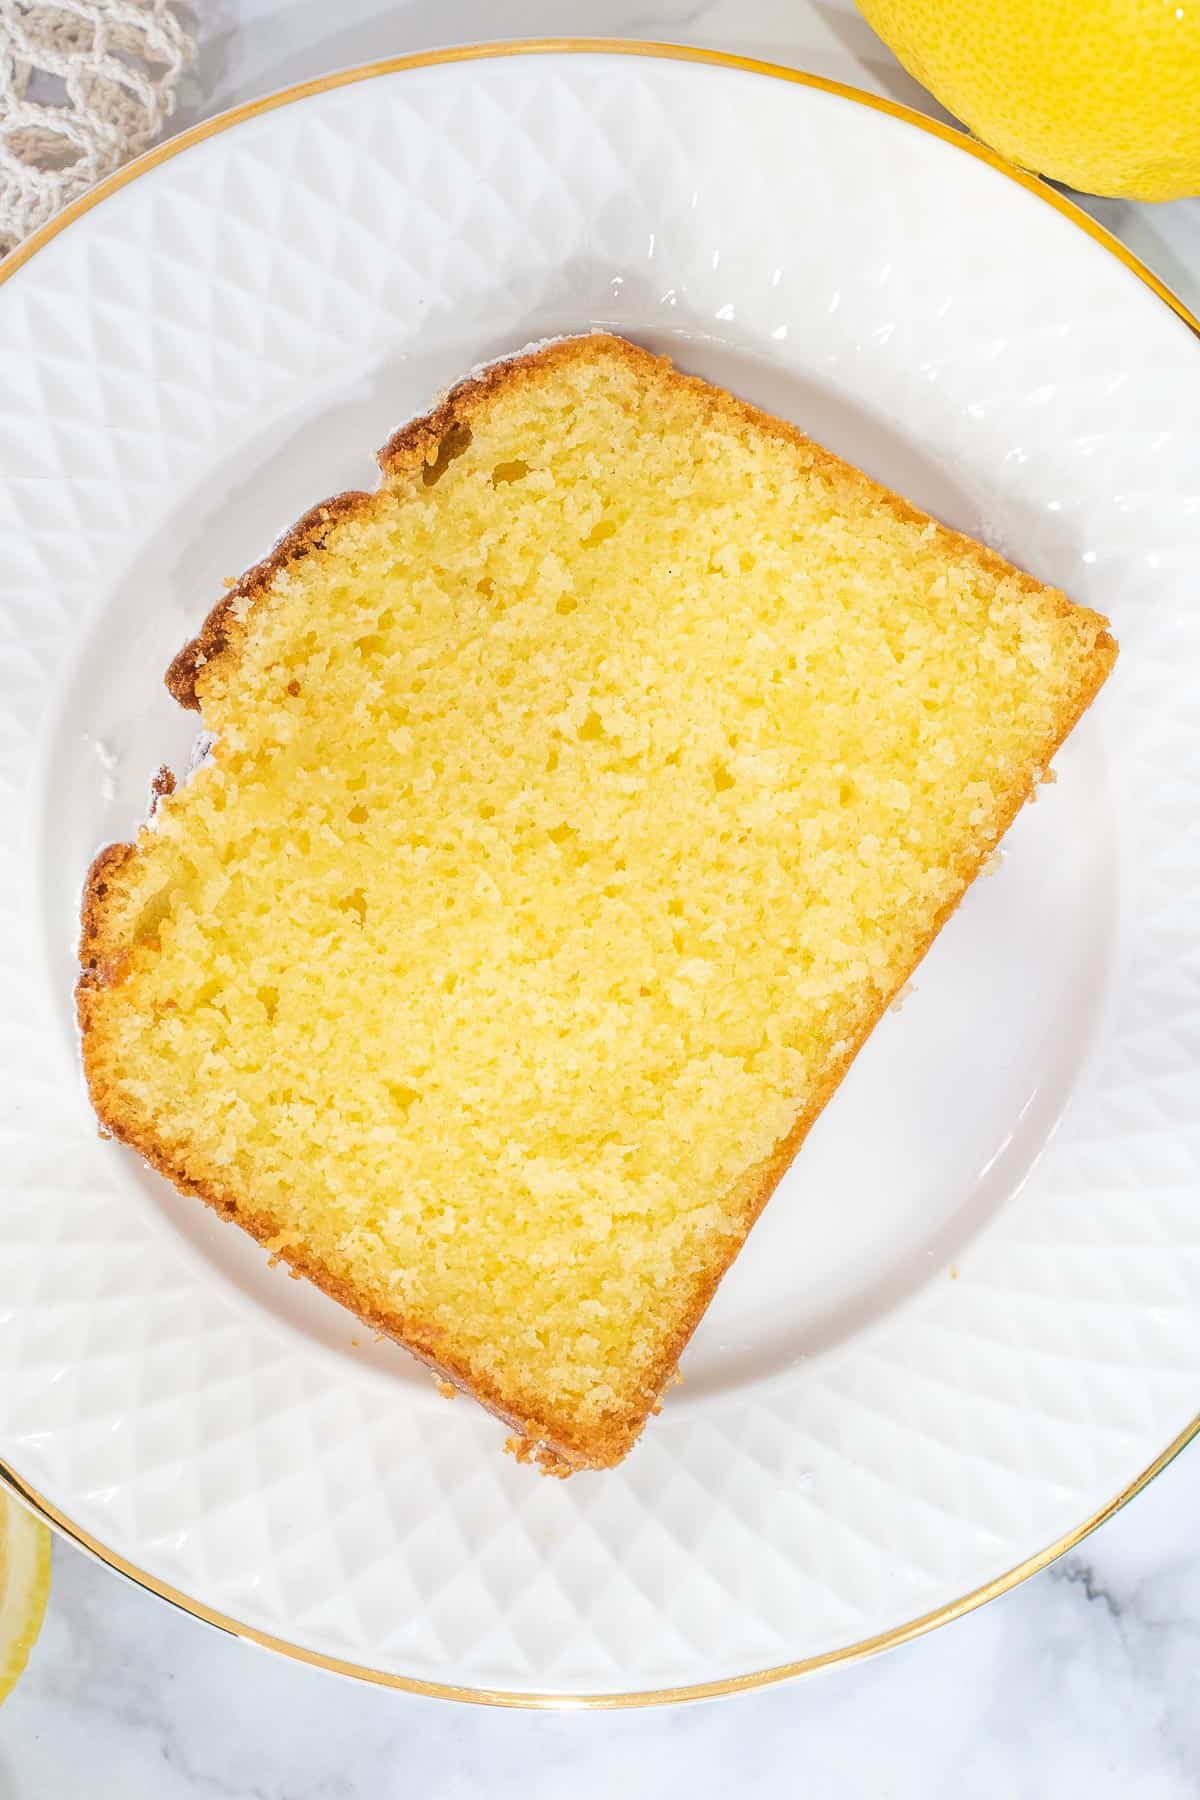 A slice of cake on a white plate